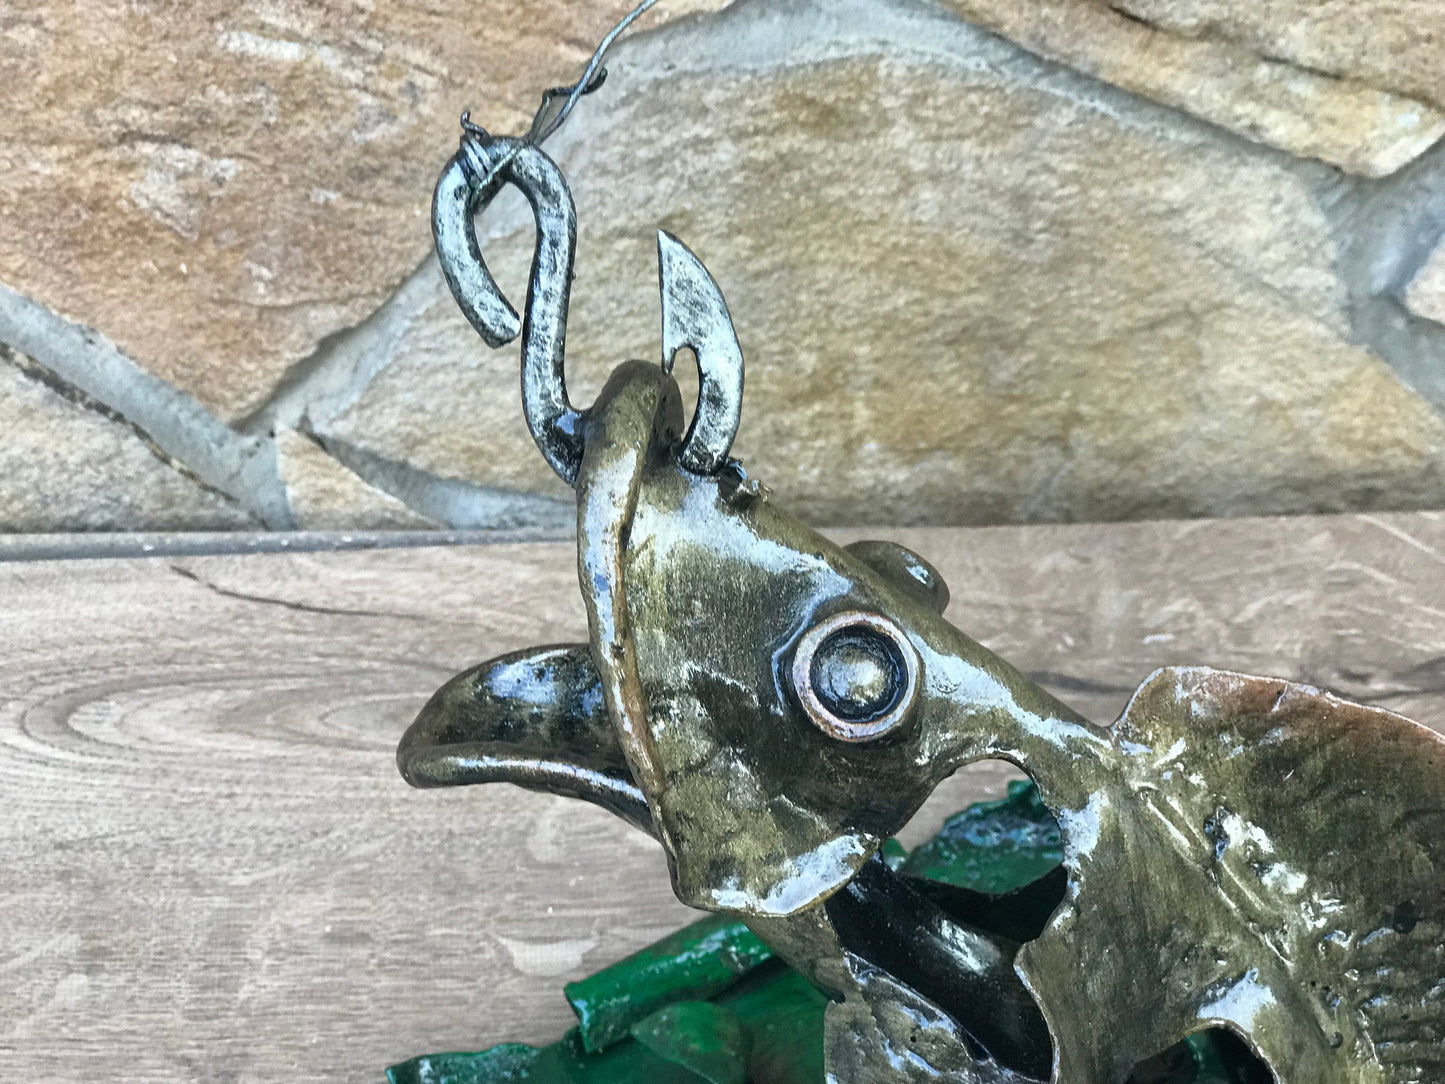 Metal fish, hand forged fish, metal fish art, metal fish sculpture, metal fish decor, iron fish, fishing gift,gift for fisher,steel fish art